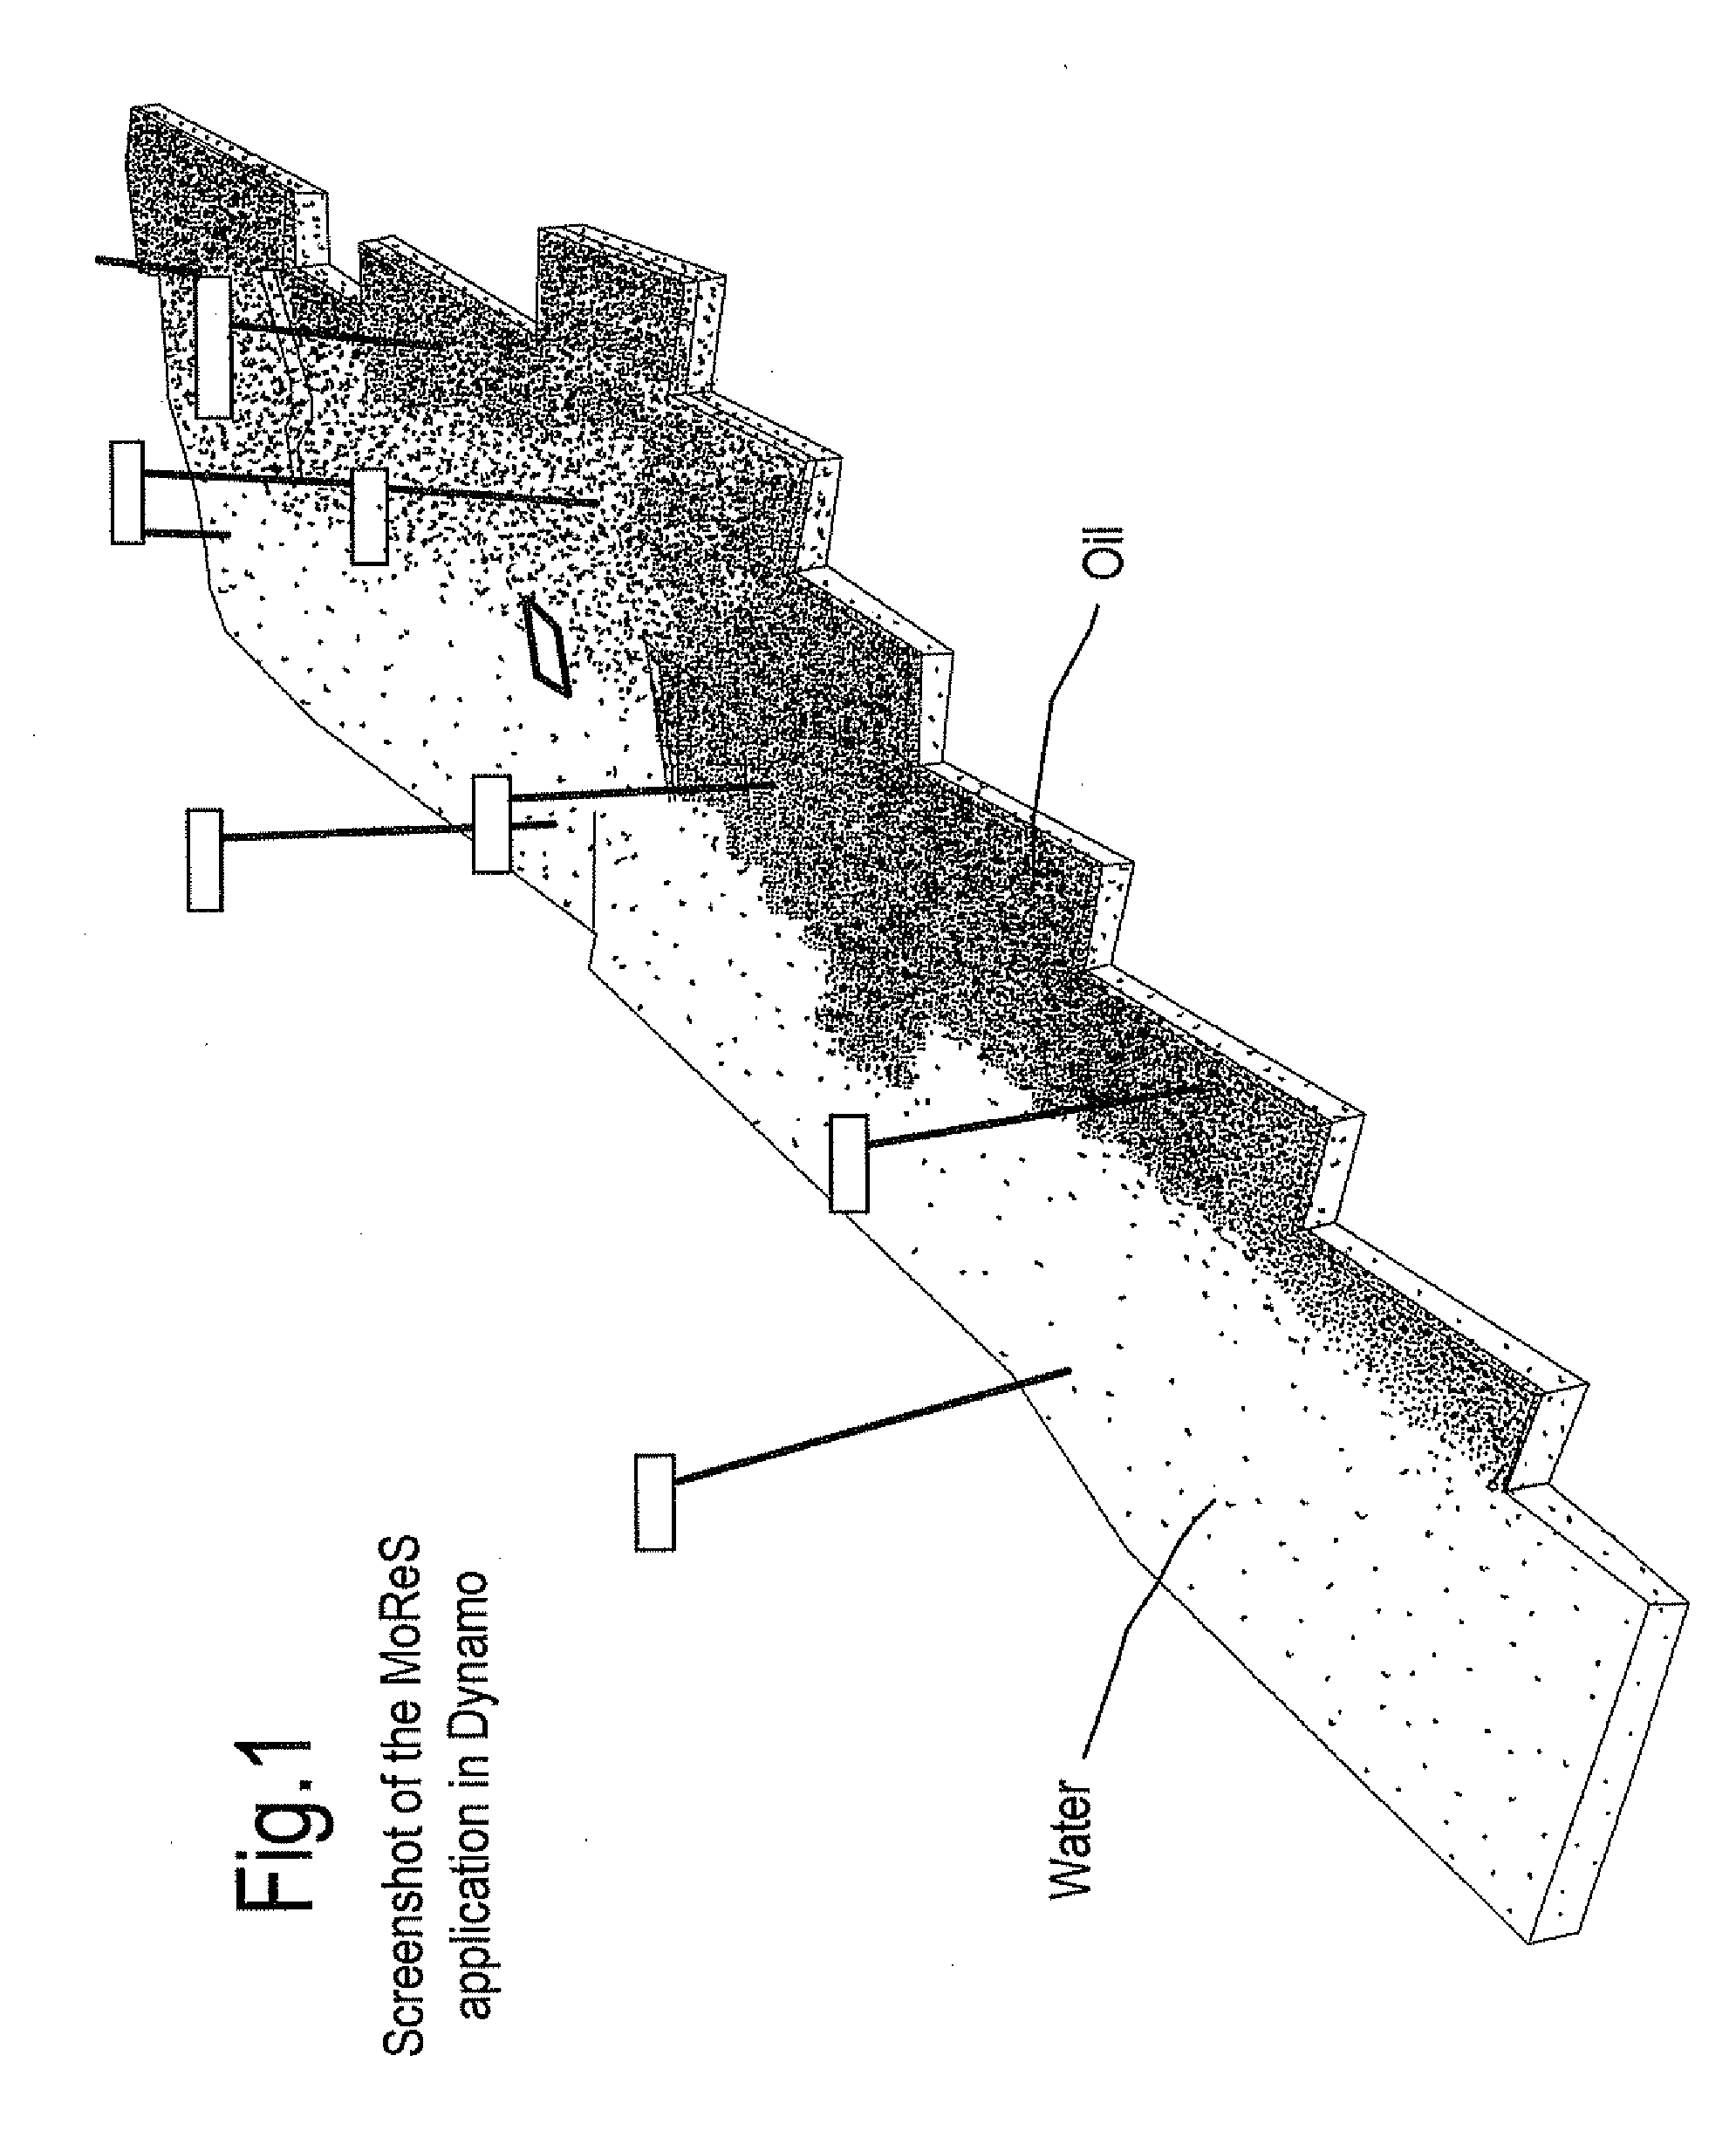 Method and system for simulating fluid flow in an underground formation with uncertain properties